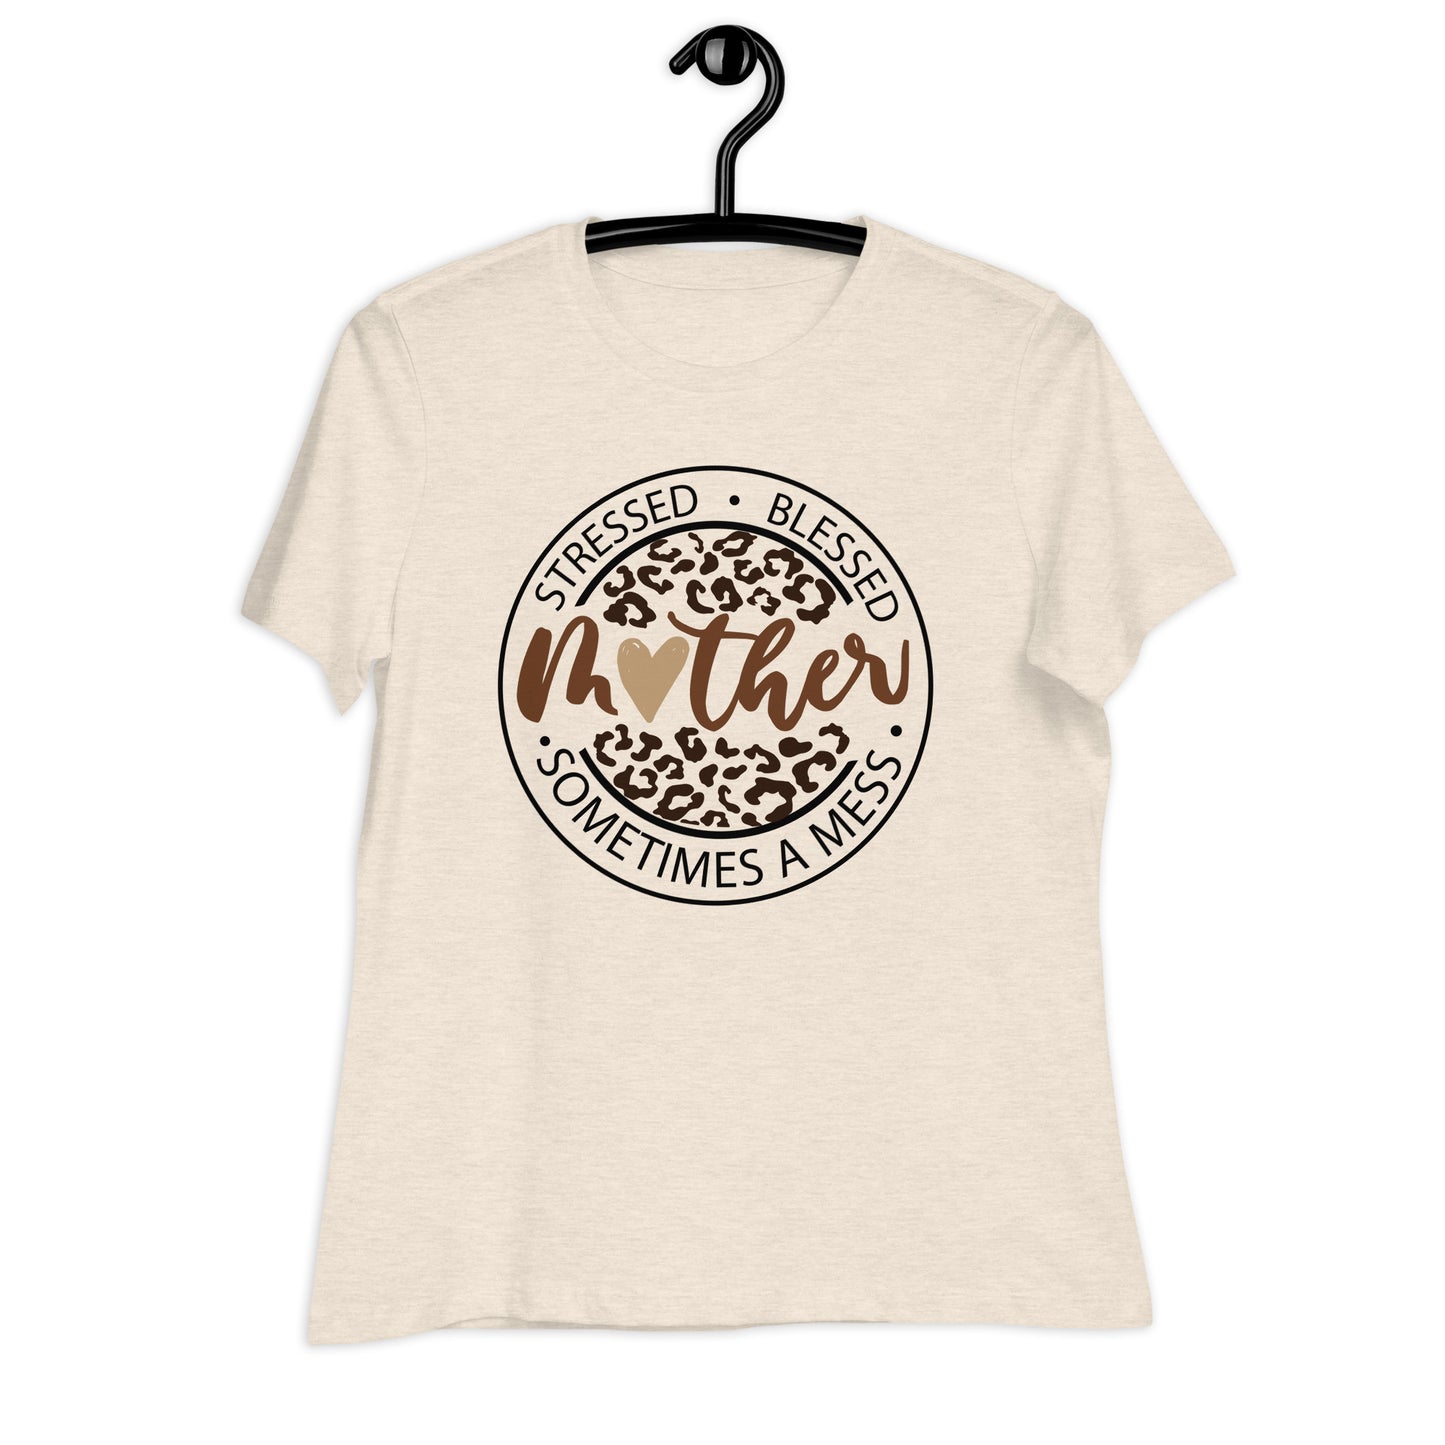 "Mother: Stressed, Blessed & A Mess" Relaxed T-Shirt